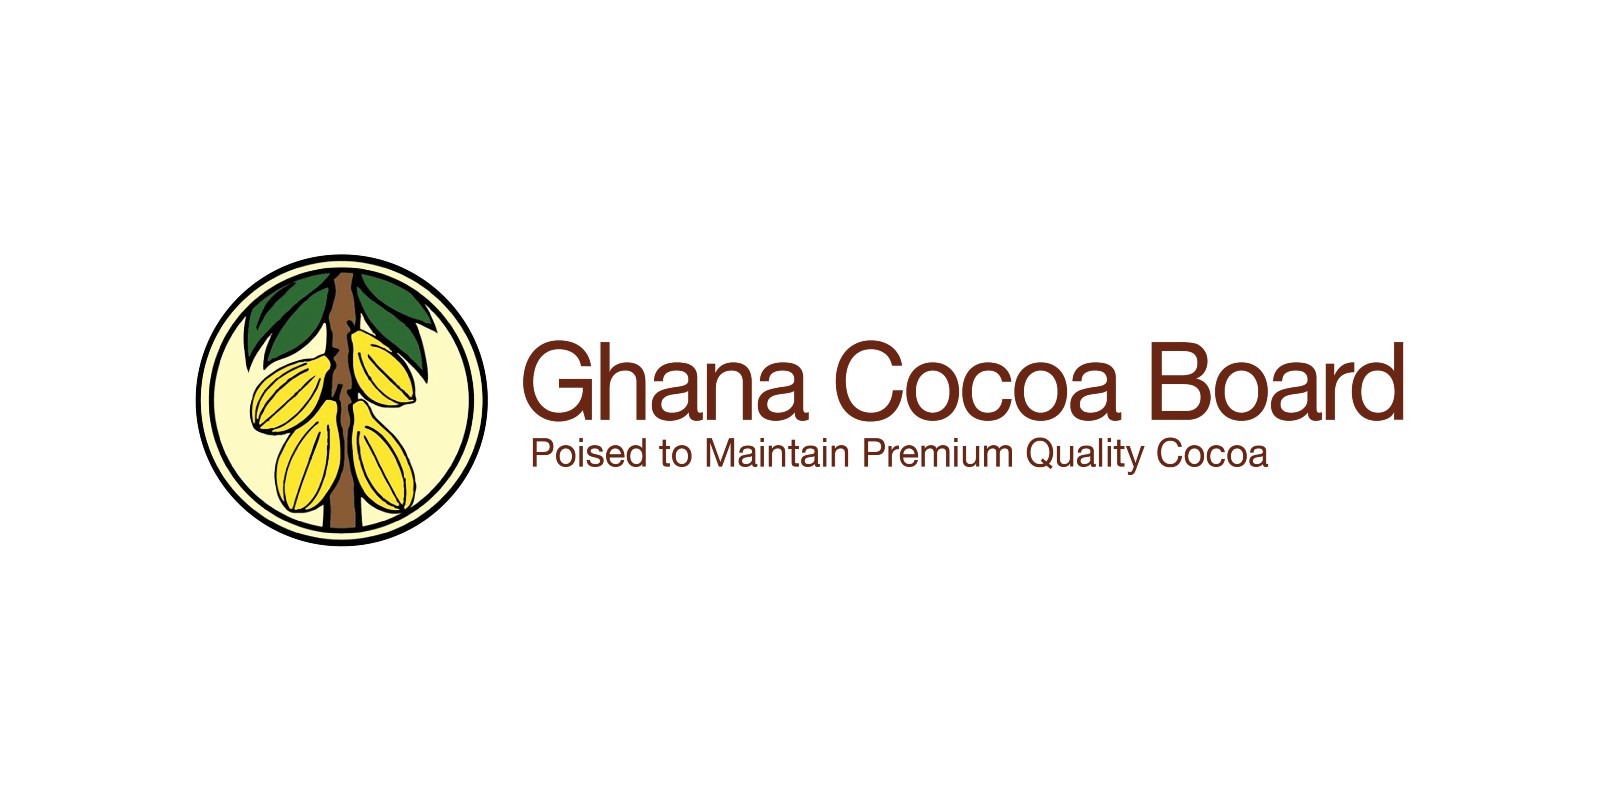 COCOBOD WANTS TO DOUBLE PRODUCTION BY BEATING CSSV